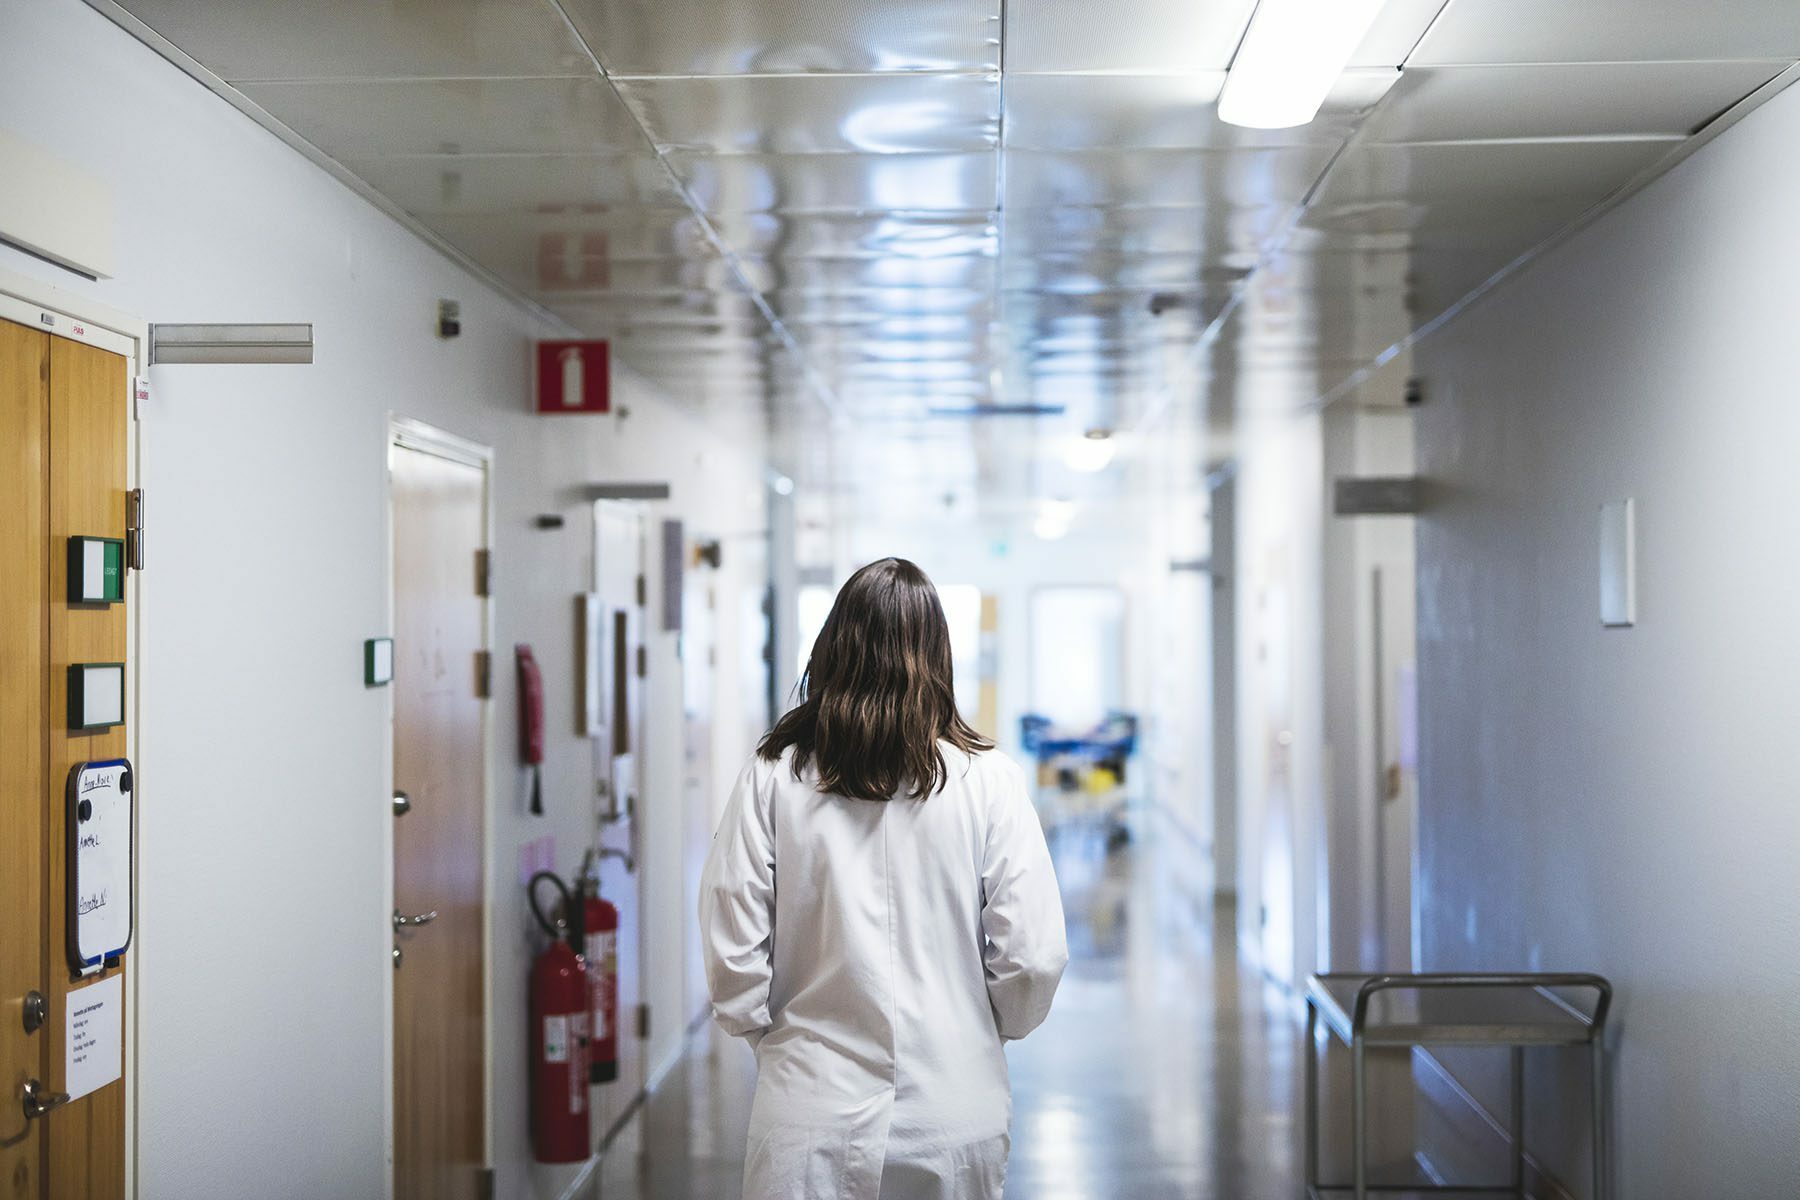 A doctor wearing a white coat is seen walking through a hospital corridor from the back.